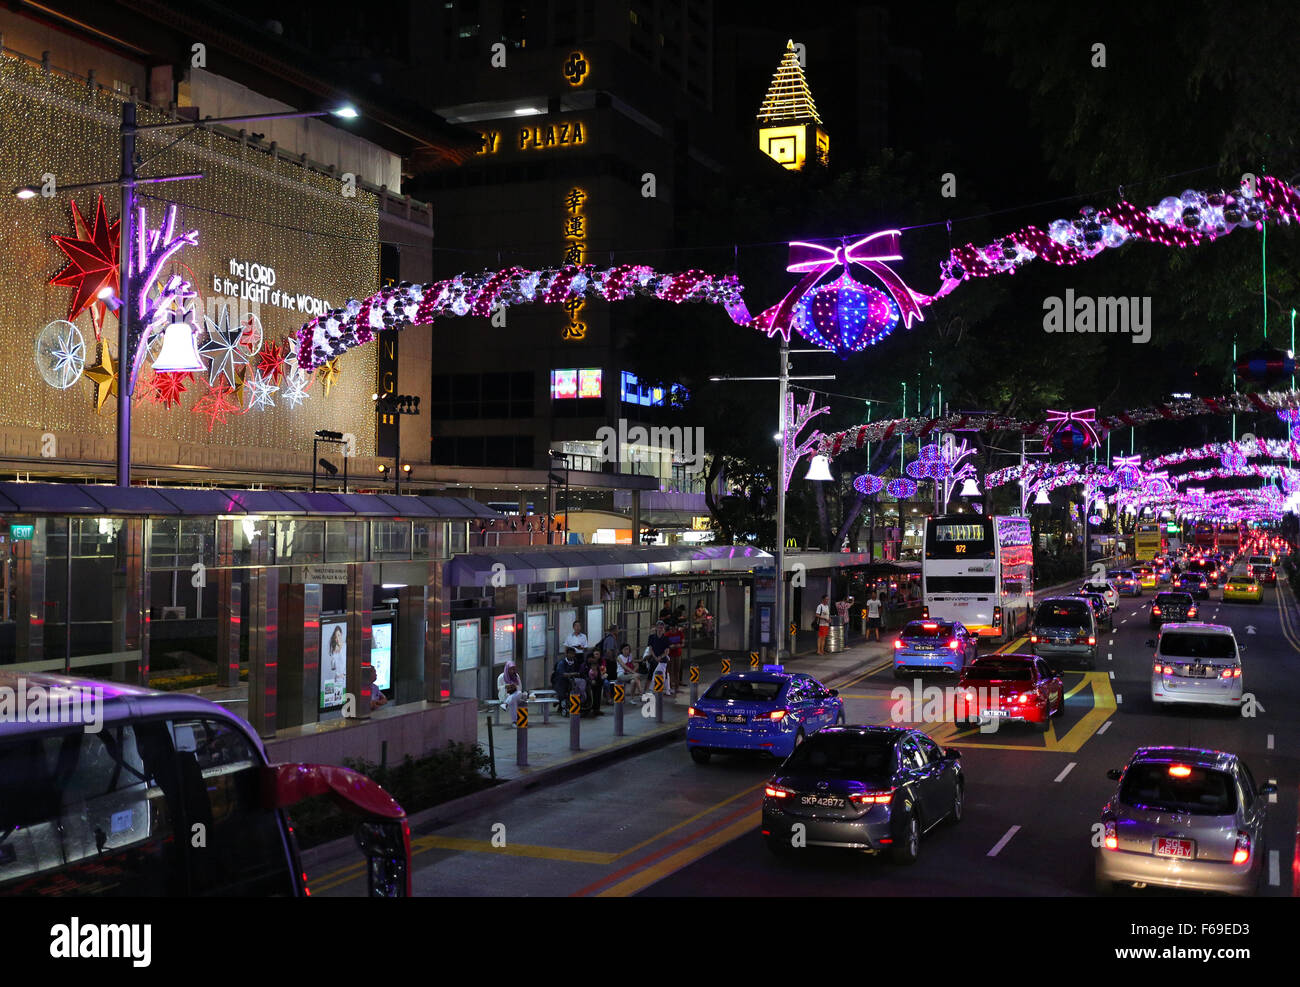 Singapore, Christmas light-up will be displayed from Nov. 14. 3rd Jan, 2016. Photo taken on Nov. 14, 2015 shows Christmas lights at Orchard Road in Singapore. Themed on 'Christmas on A Great Street', this year's Christmas light-up will be displayed from Nov. 14, 2015 to Jan. 3, 2016. Visitors can look forward to celebrating the festive season in an atmosphere of merriment. Credit:  Bao Xuelin/Xinhua/Alamy Live News Stock Photo